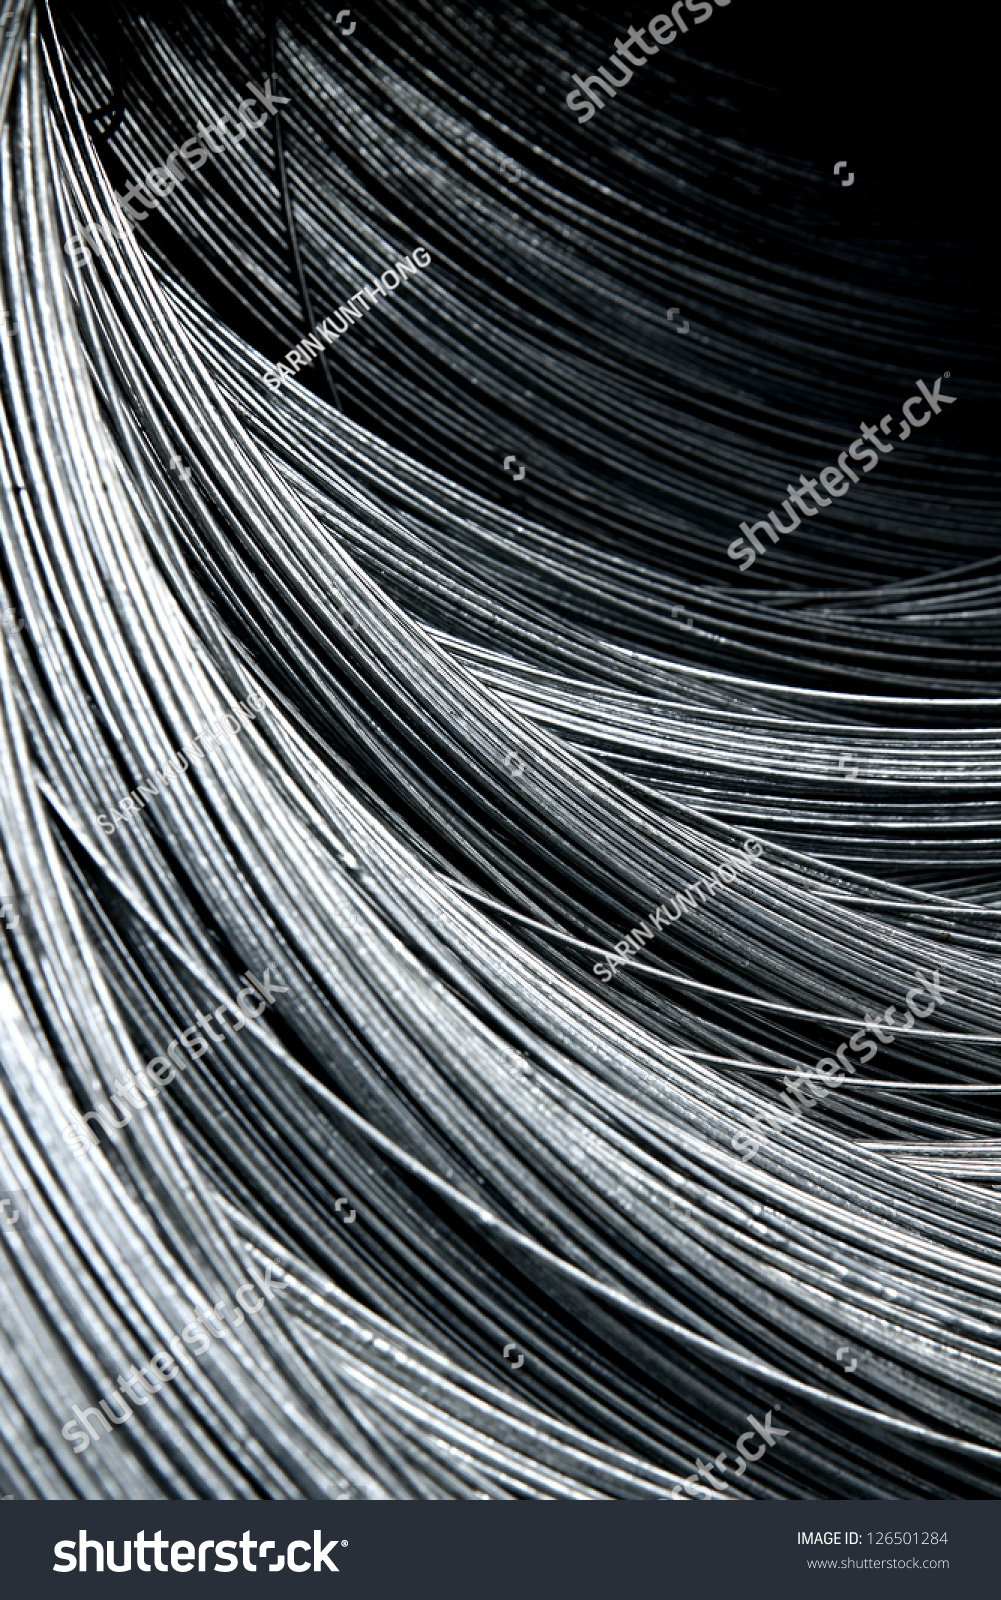 Texture Of Steel Wire In A Coils Stock Photo 126501284 : Shutterstock